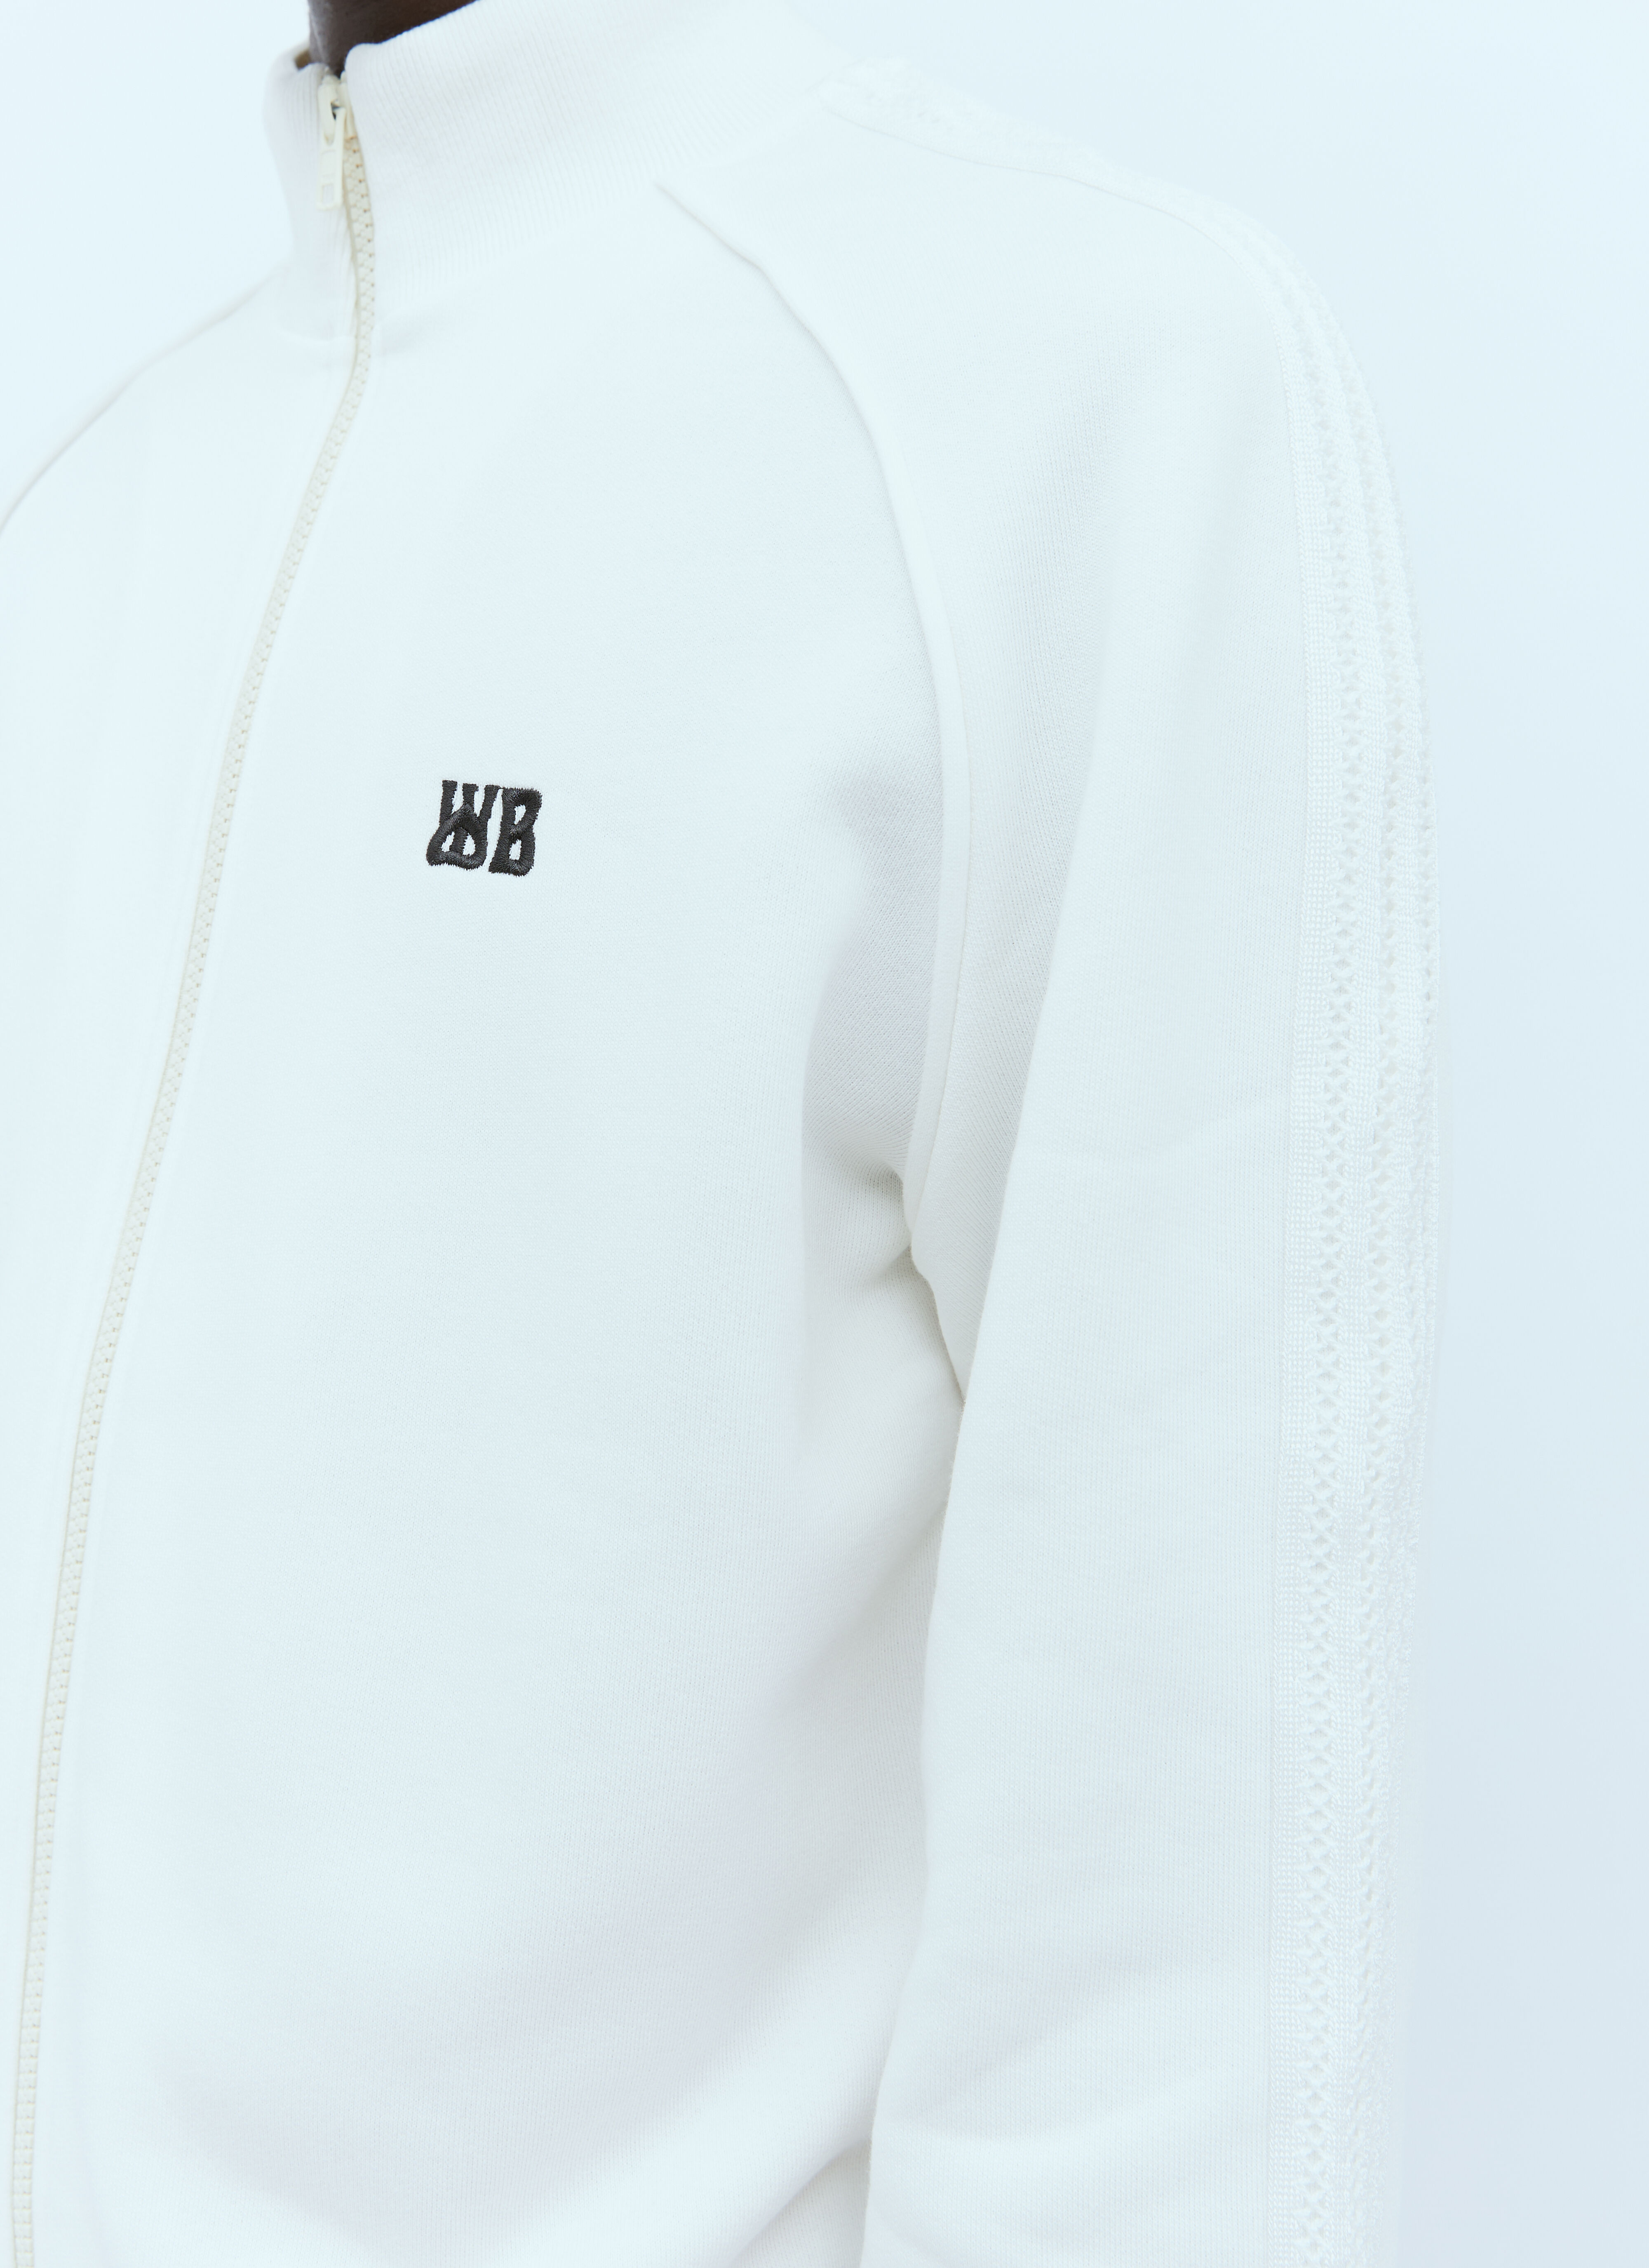 Wales Bonner Wander Track Jacket in White | LN-CC®